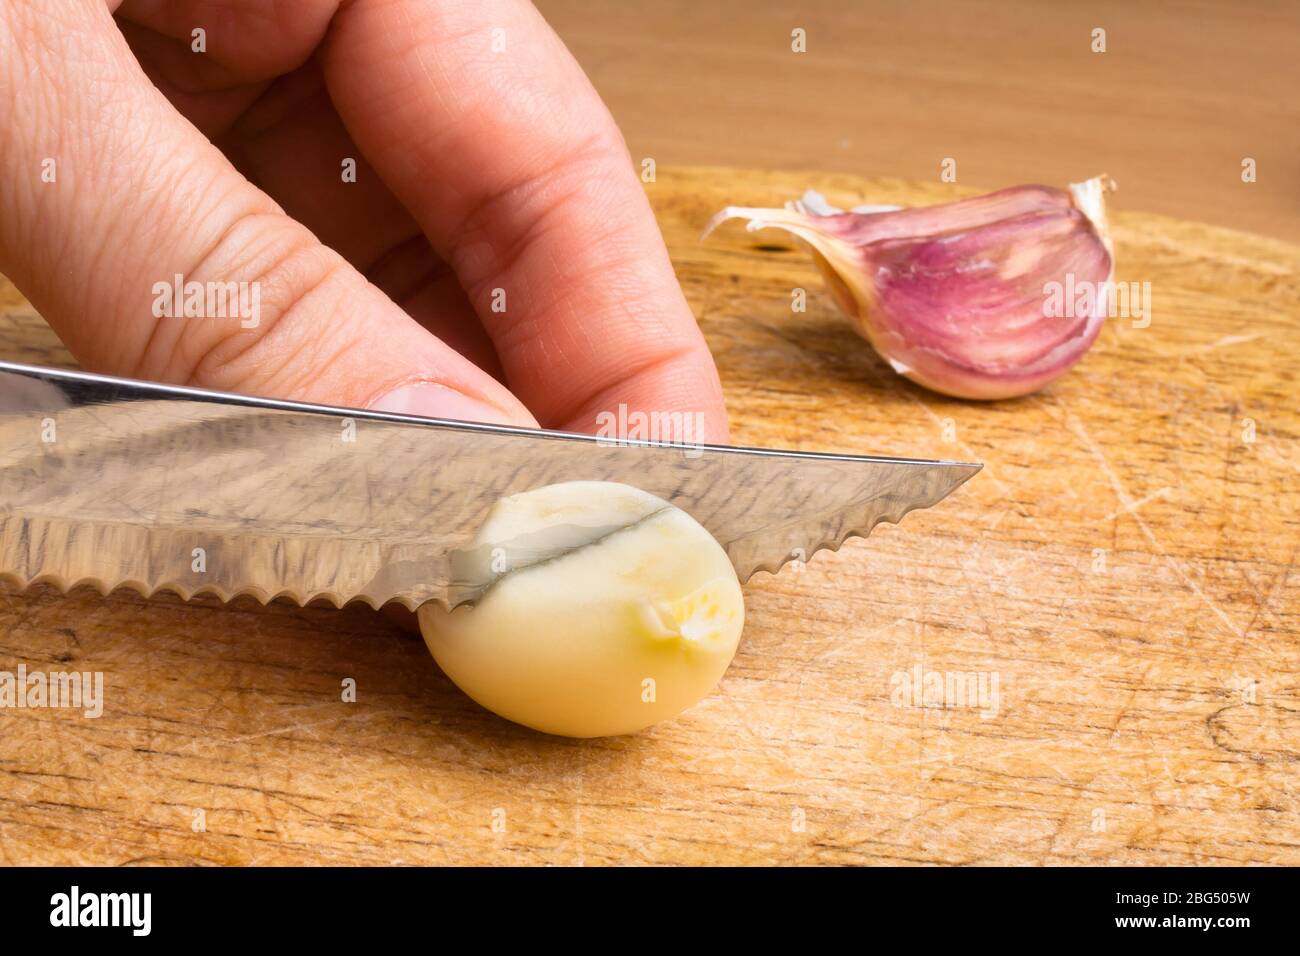 hand slicing garlic cloves on the cutting board with a knife Stock Photo